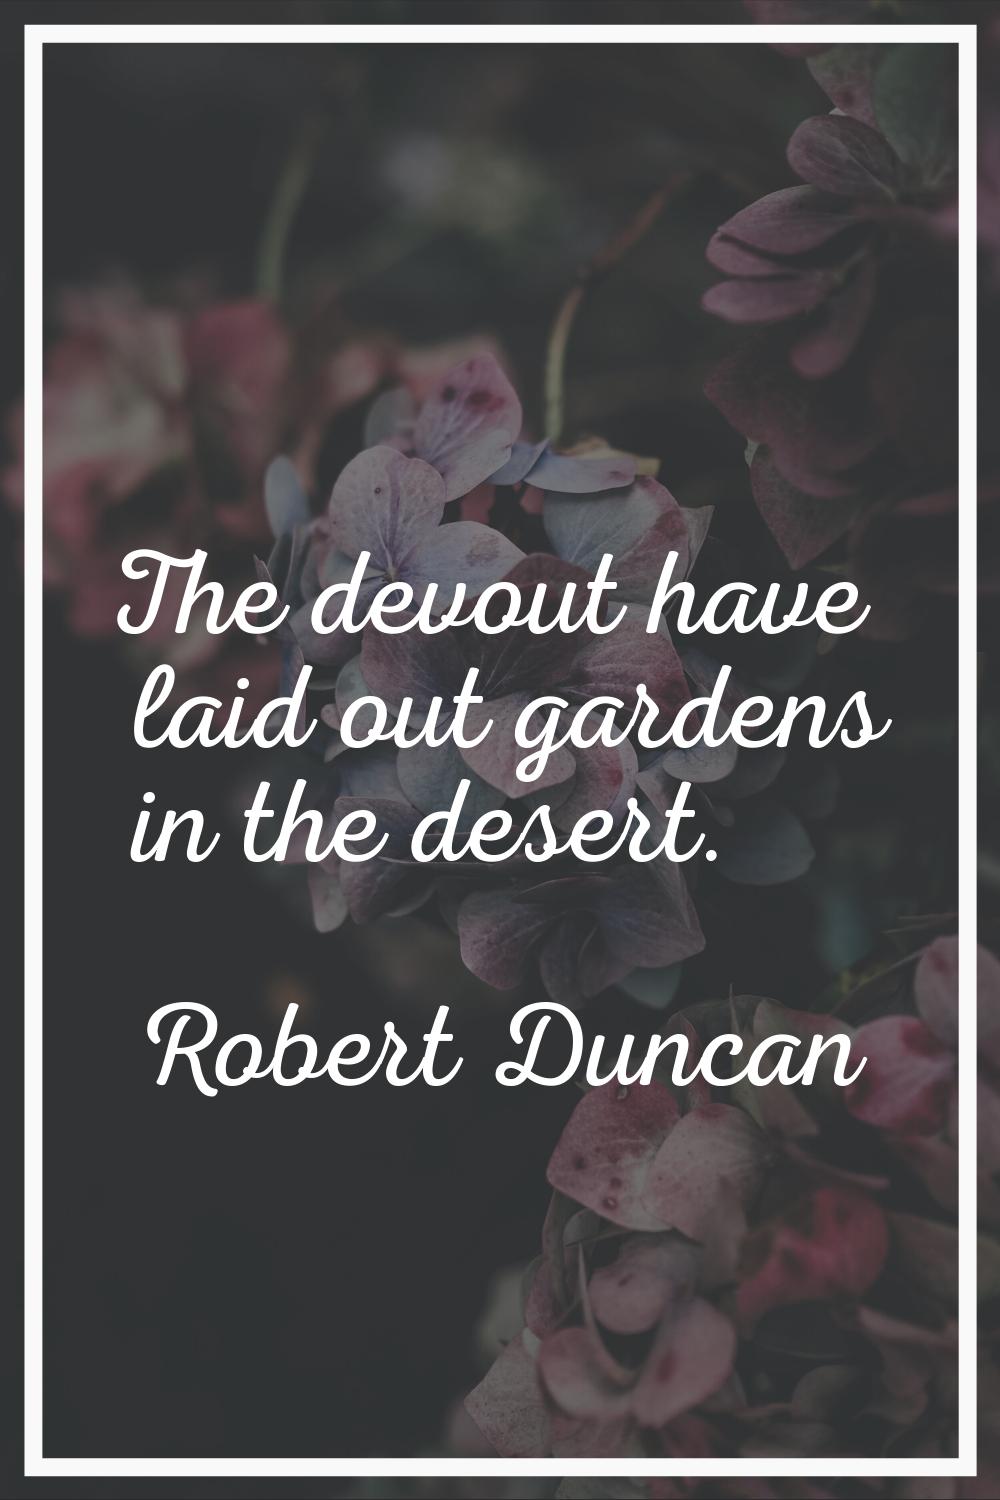 The devout have laid out gardens in the desert.